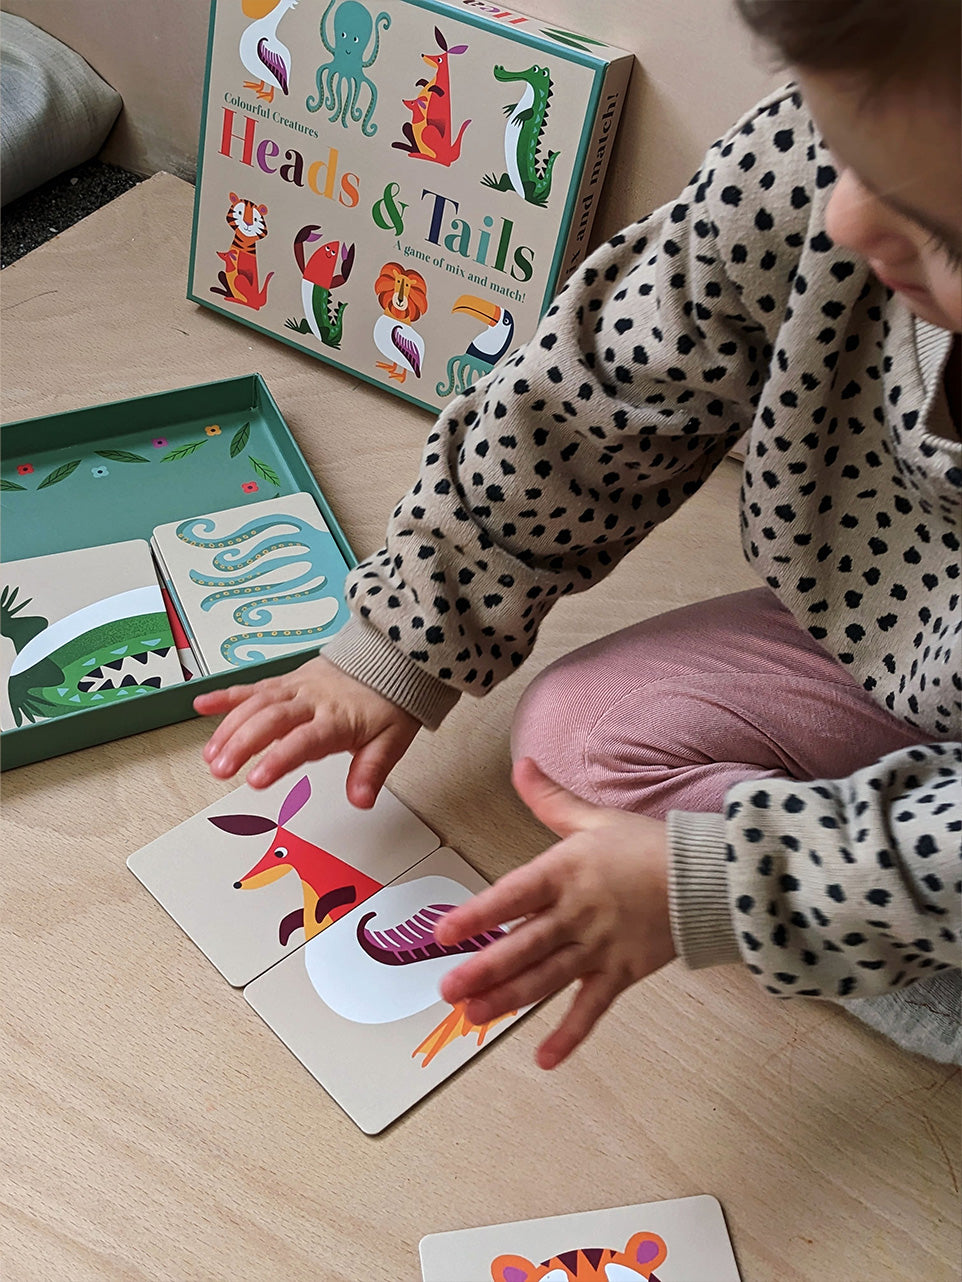 Toddler creating silly animals as she tries to match up the heads and tails of the animals in this card game